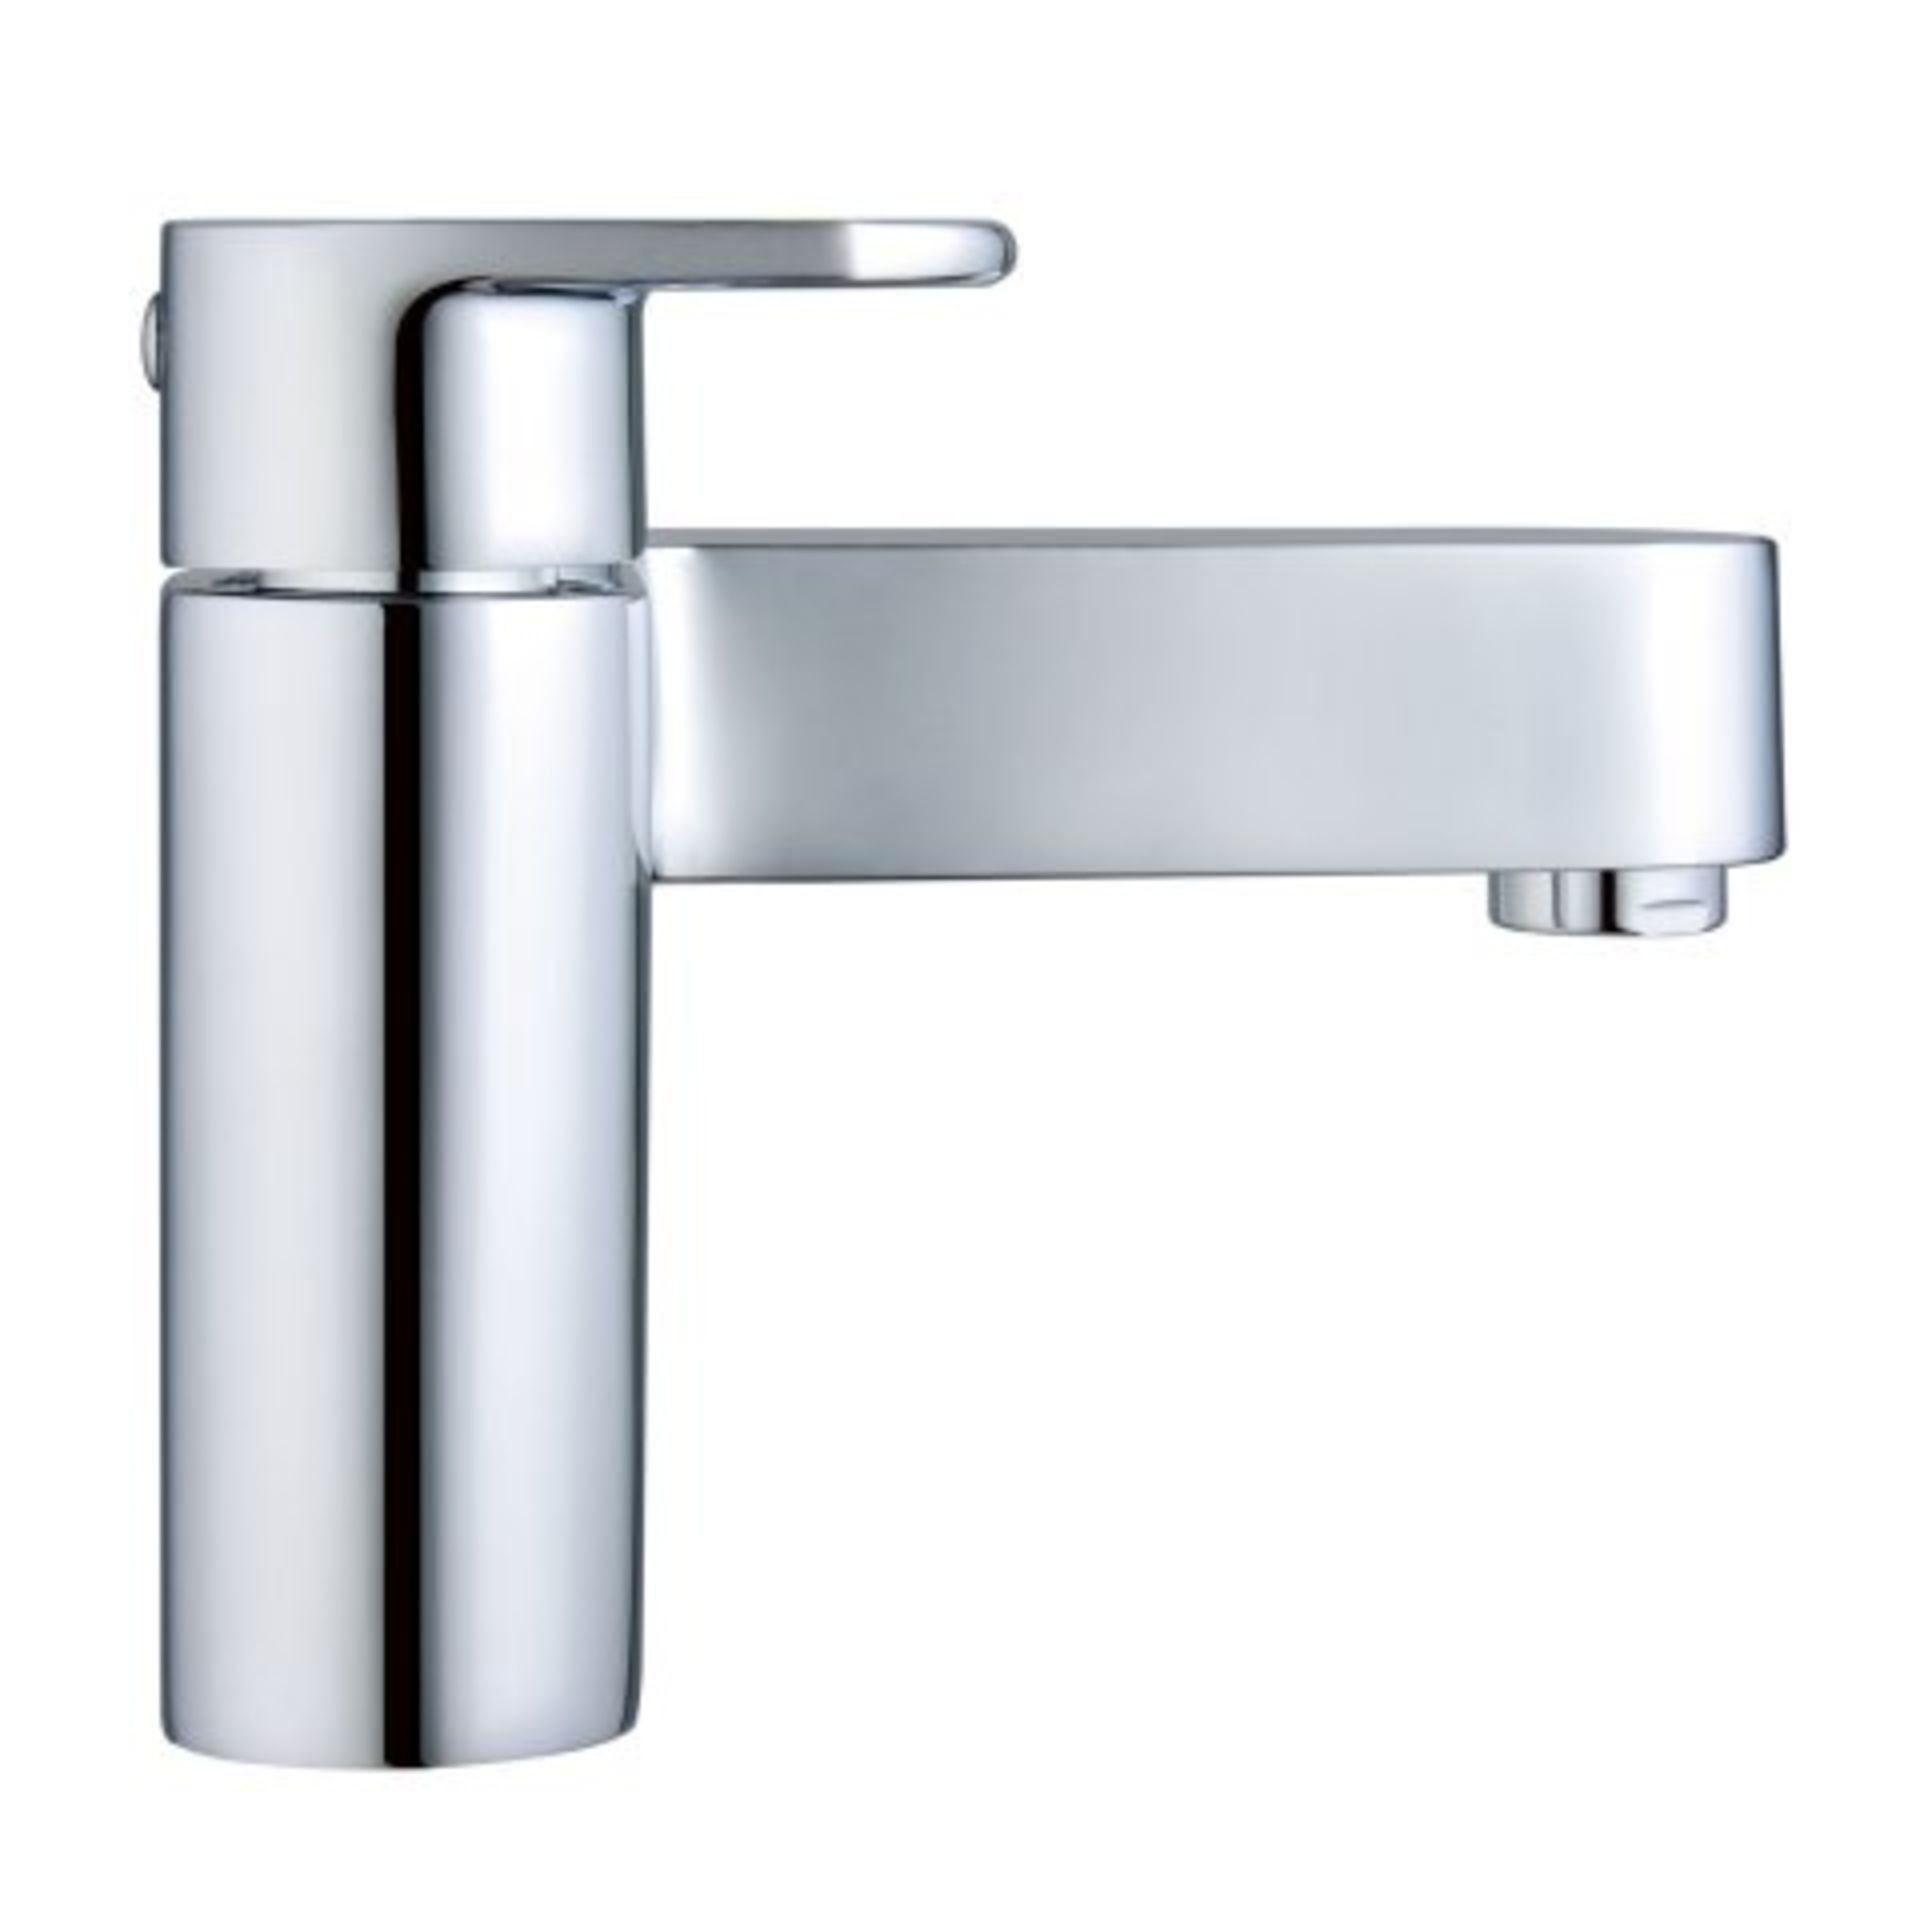 (T37) Boll Bath Filler Mixer Tap. RRP £140.39._x00D__x00D_Presenting a contemporary design, this - Image 3 of 4